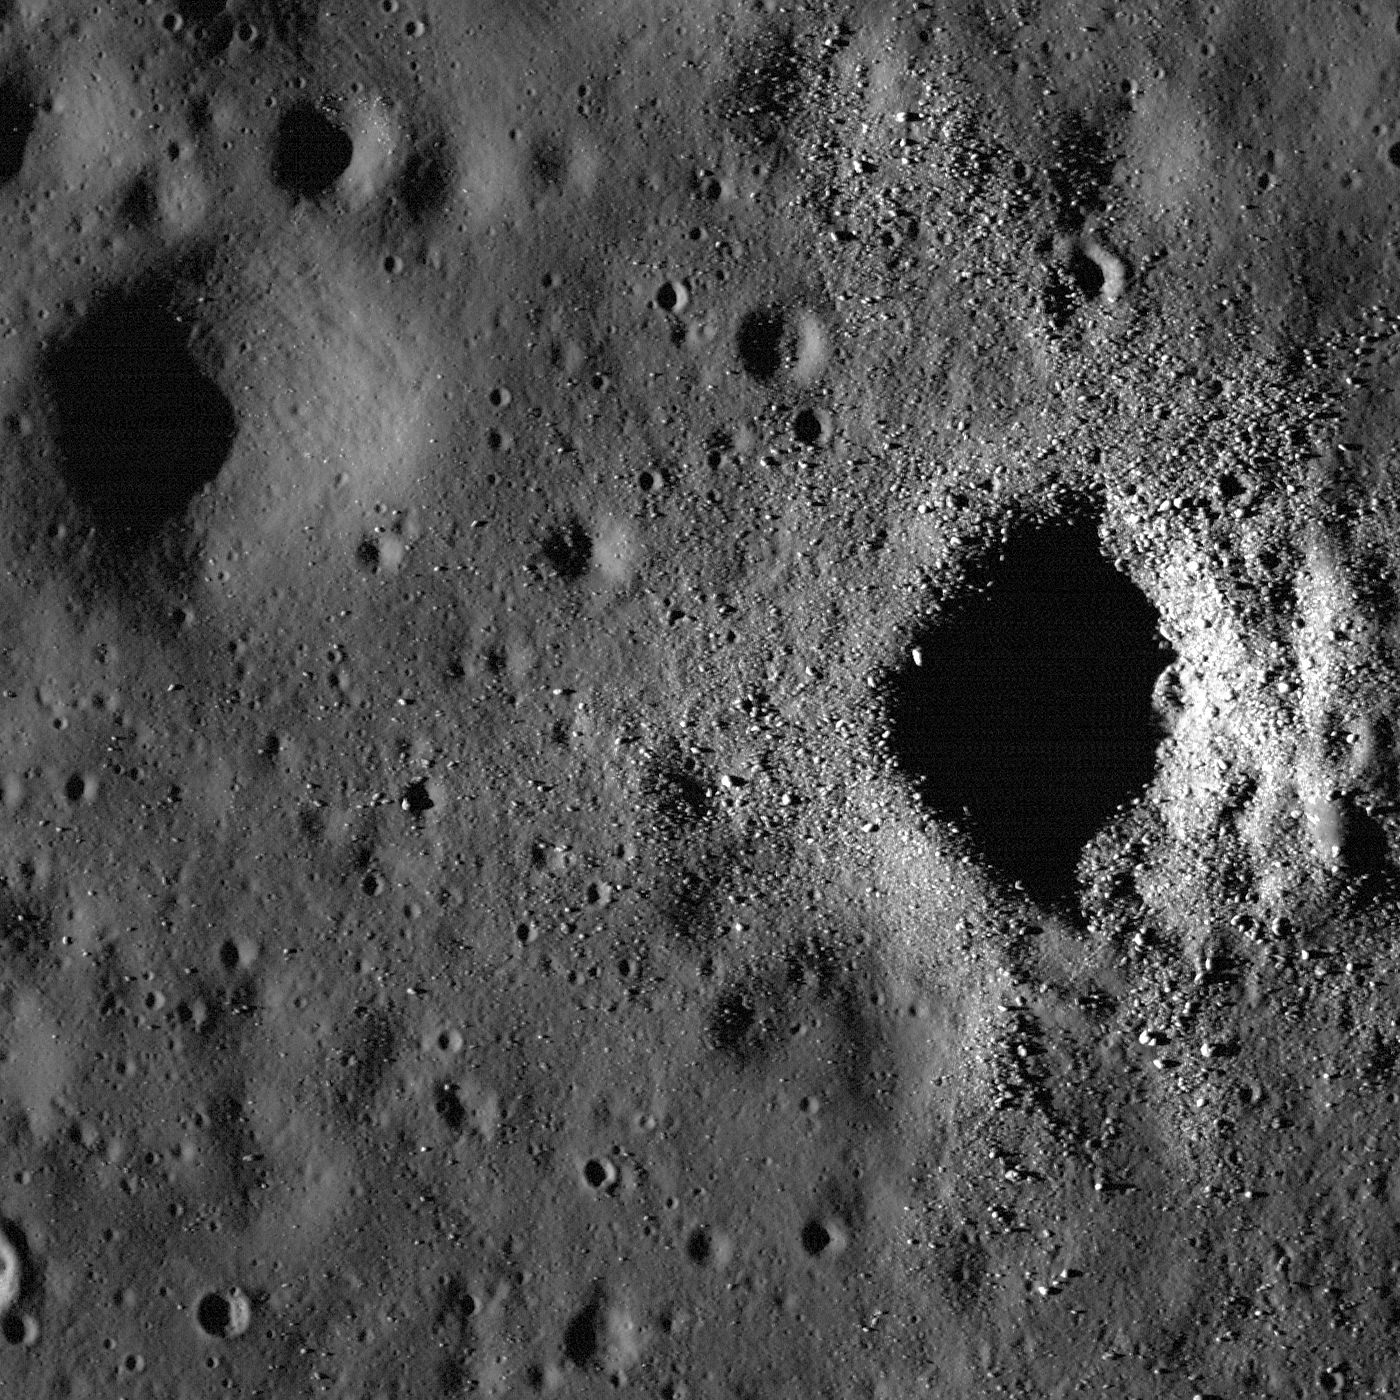 moon craters map